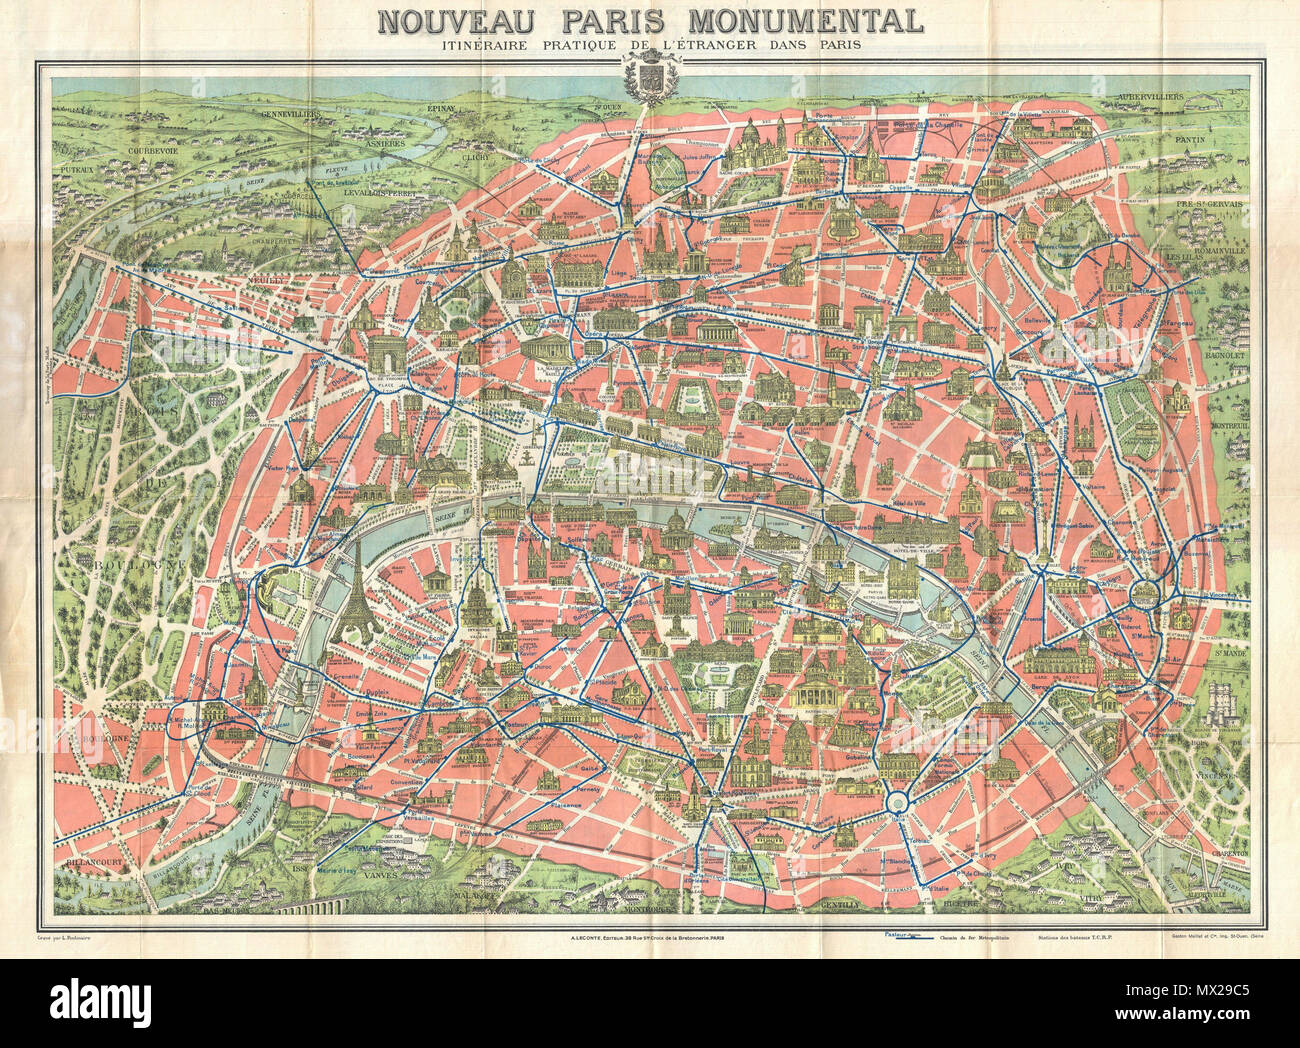 . Nouveau Paris Monumental Inineraire Pratique de L'Etranger Dans Paris.  English: A highly decorative map of Paris dating to c. 1910. Covers the historic center of Paris as well as some of the surrounding countryside - in particular the Bois de Boulogne. Designed with the tourist in mind, this map shows all major monuments and historic attractions, including the Eiffel Tower, in profile. Train and tram lines are noted in blue. Folds into original art nouveau style red binder which also contains a short guide to the city in English, French and German. . 1910 (undated) 12 1910 Leconte Monument  Stock Photo